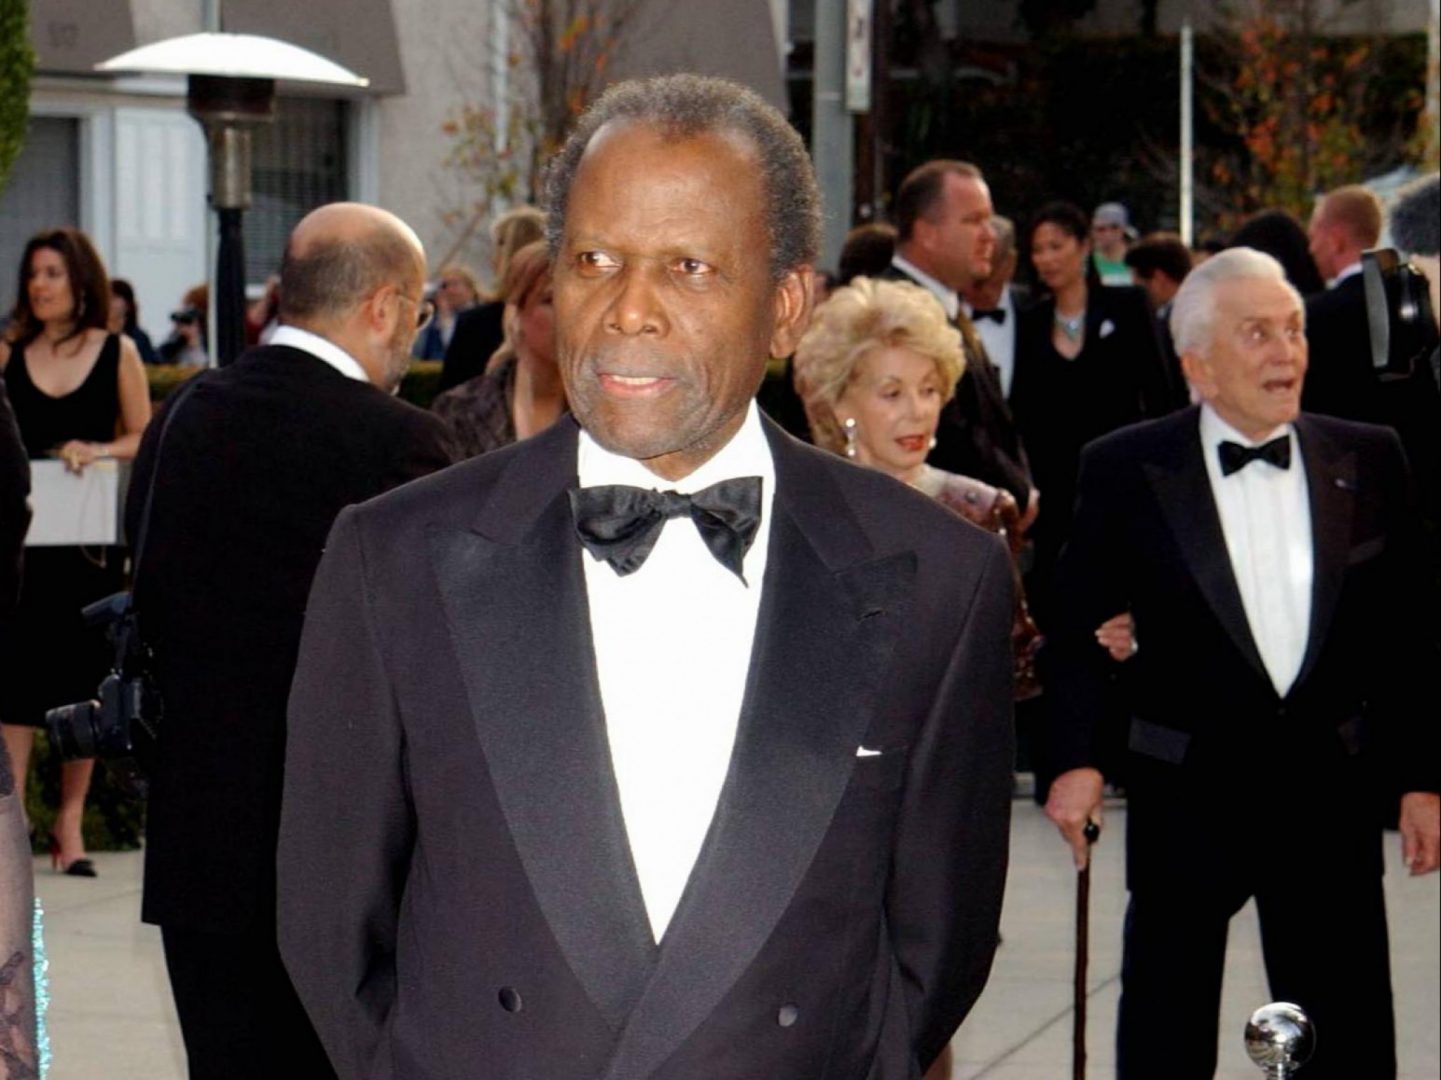 We owe Will Smith award for Best Black Stand Up, like Sidney Poitier stood up